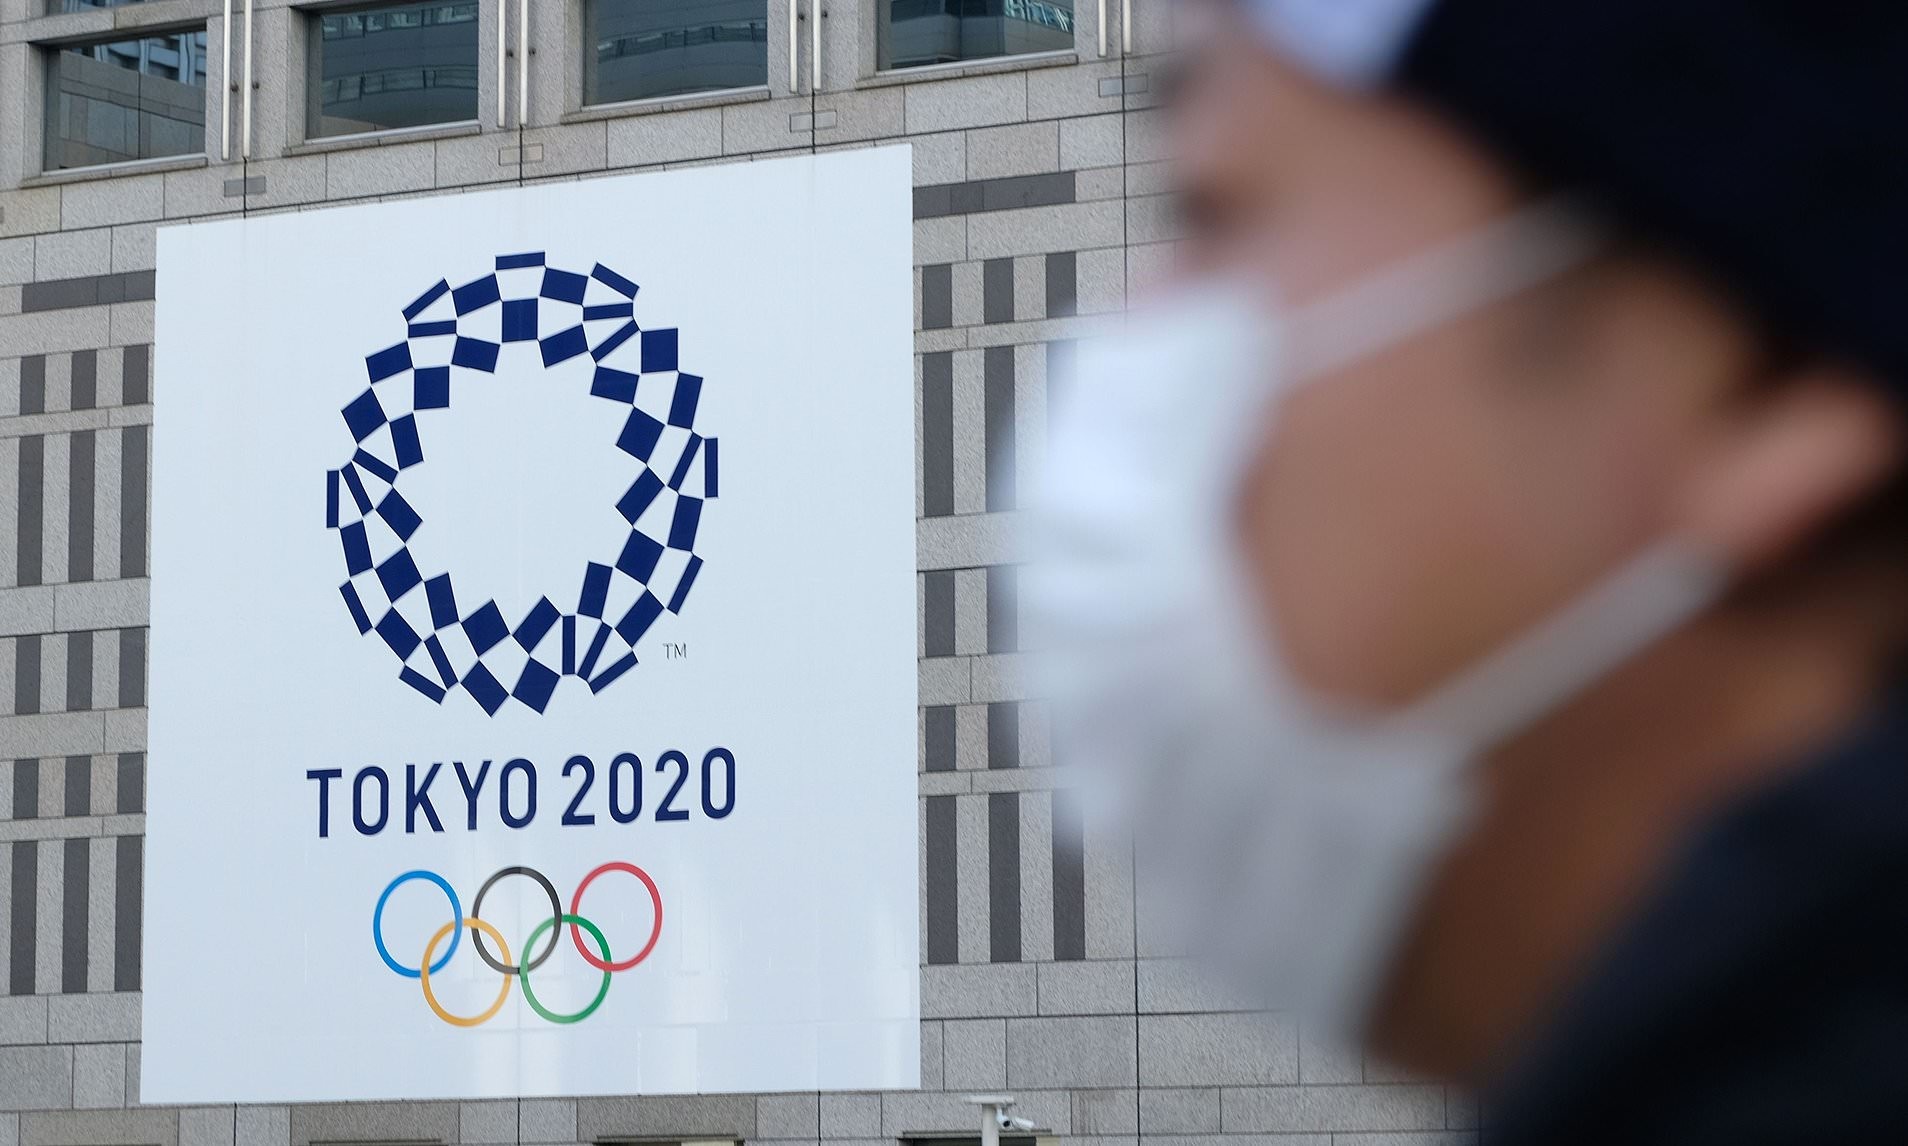 Athletes at the coronavirus-postponed Tokyo Olympics will face regular testing, restrictions on mingling and potential punishment for non-compliance with health rules